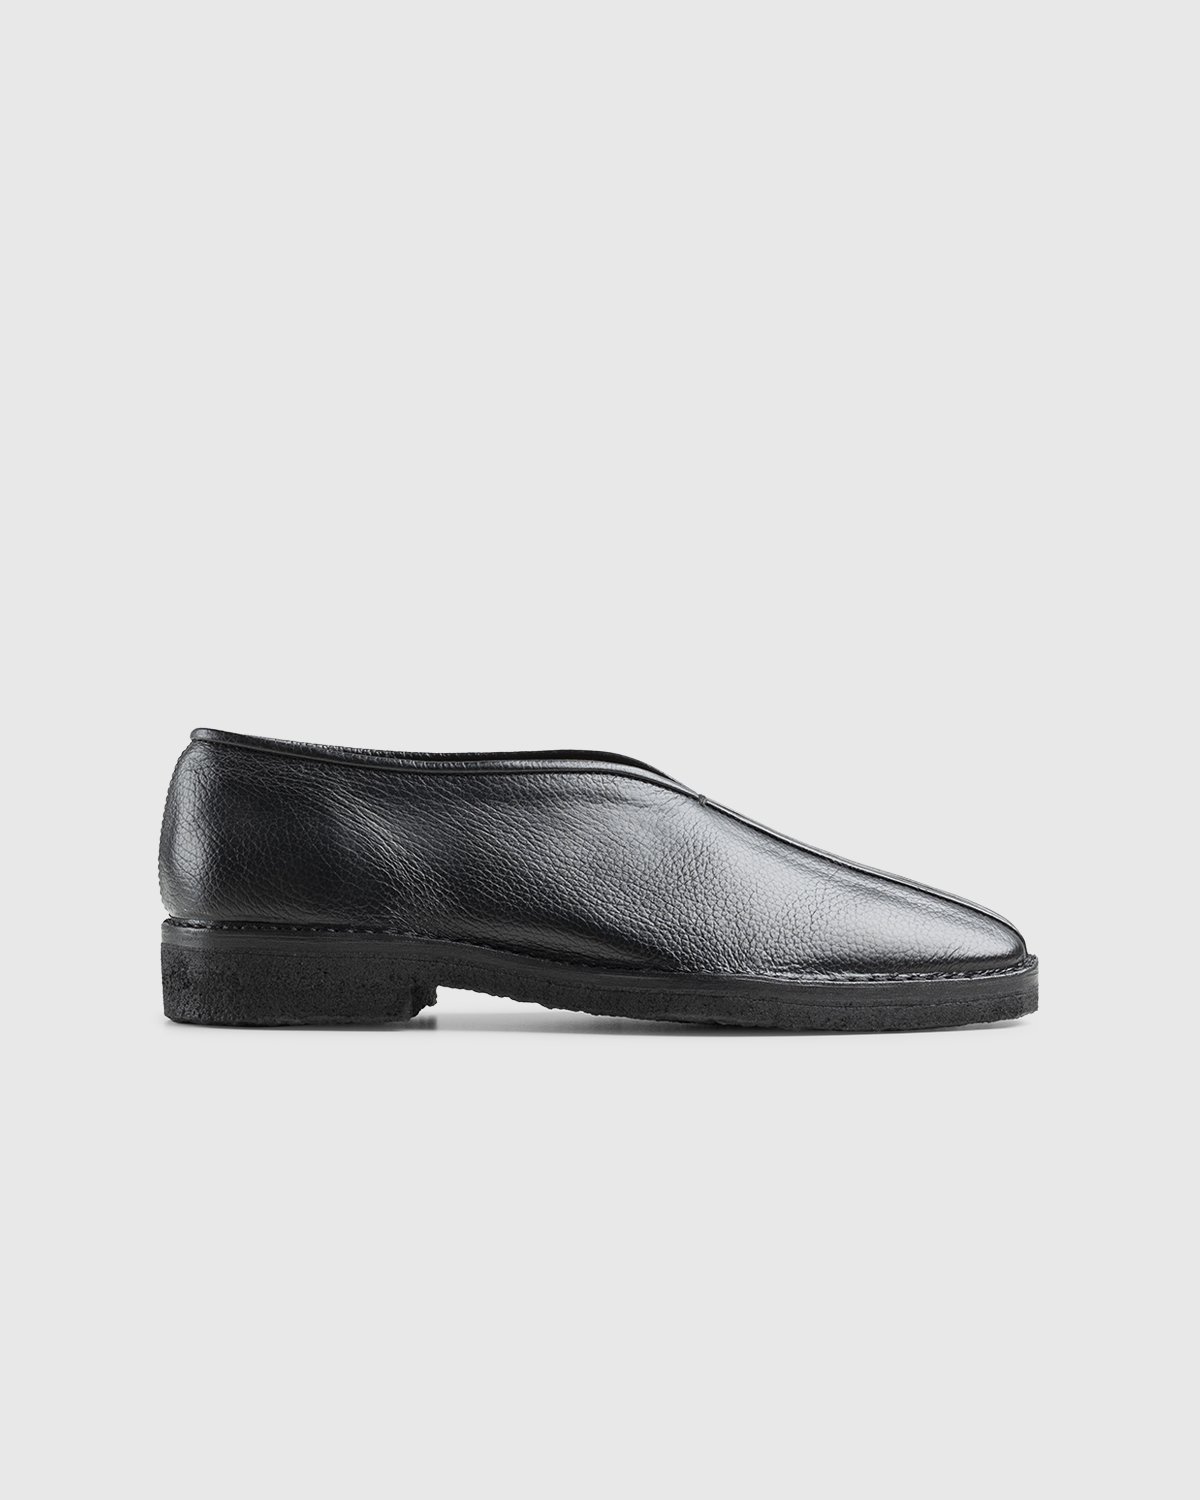 Lemaire – Leather Chinese Slippers Black | Highsnobiety Shop